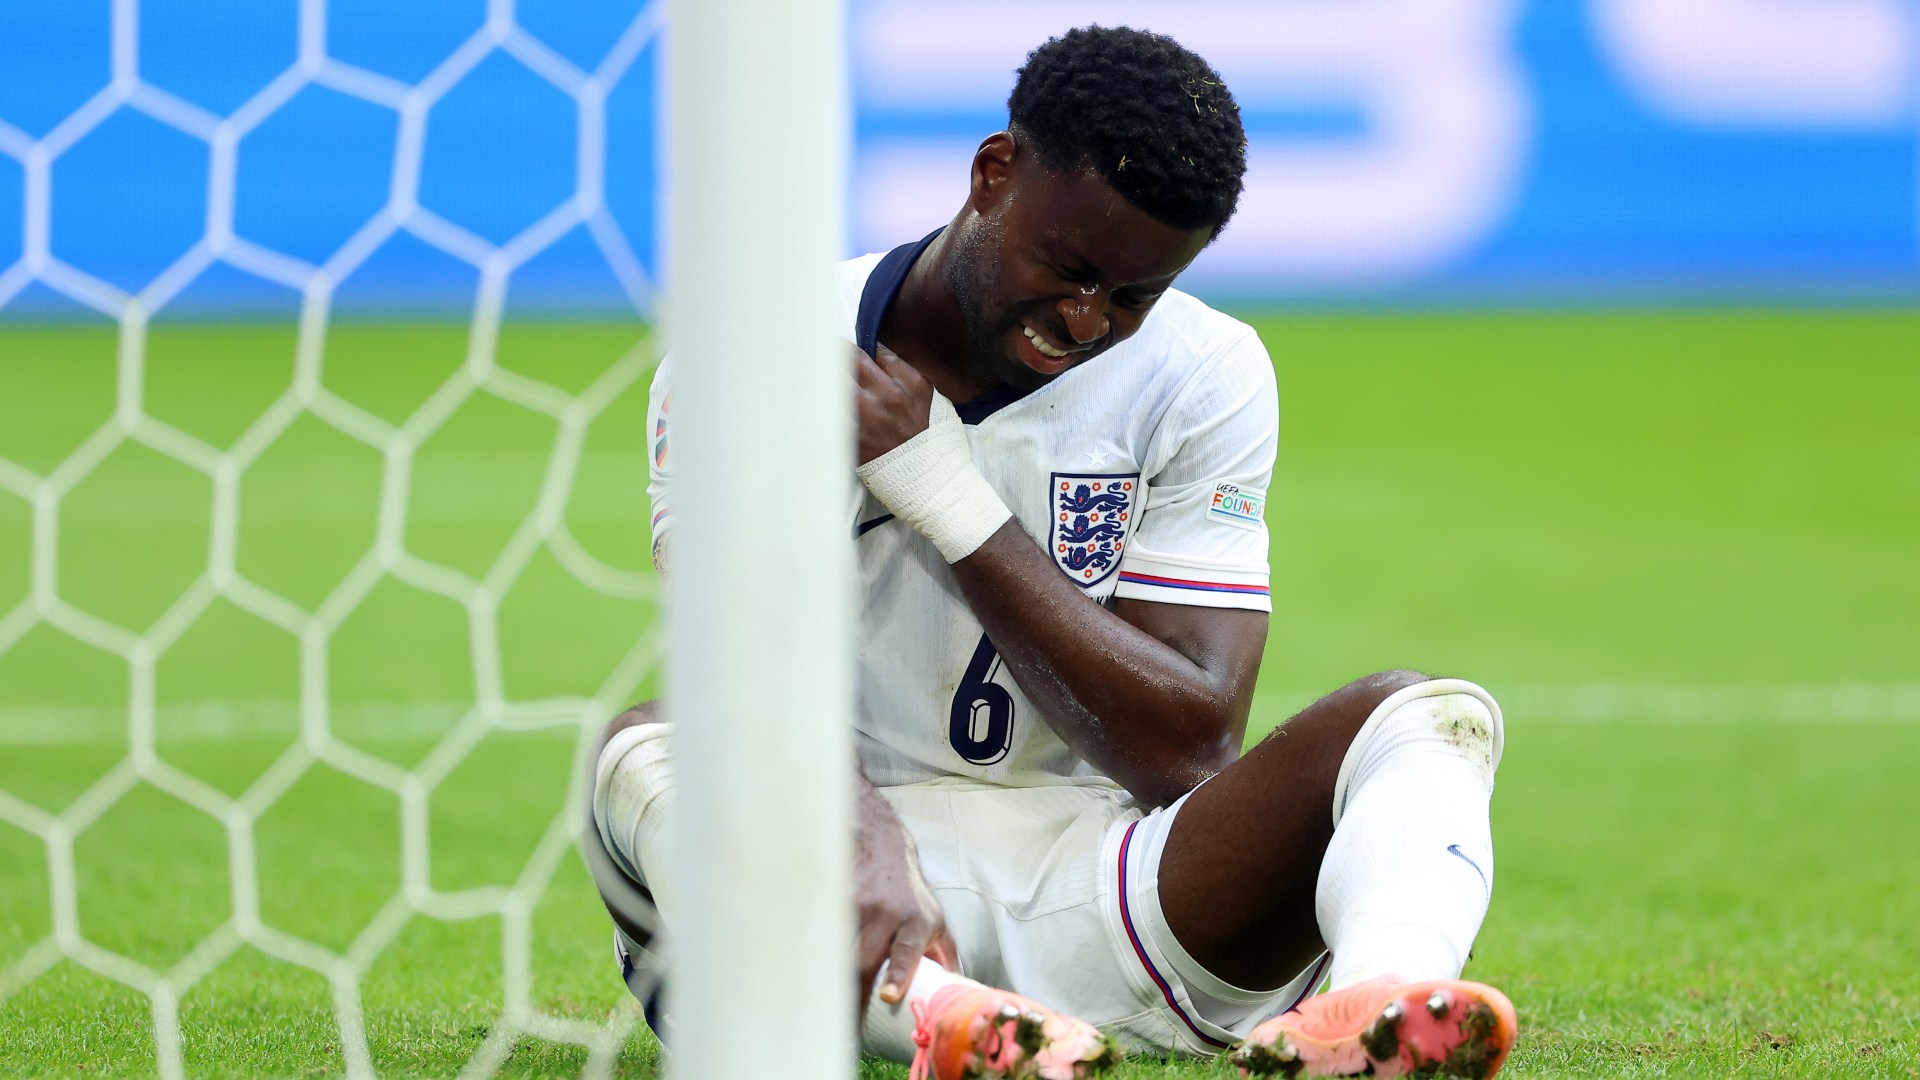 England star Marc Guehi needed injection and had to play through pain in epic comeback win against Slovakia [Video]